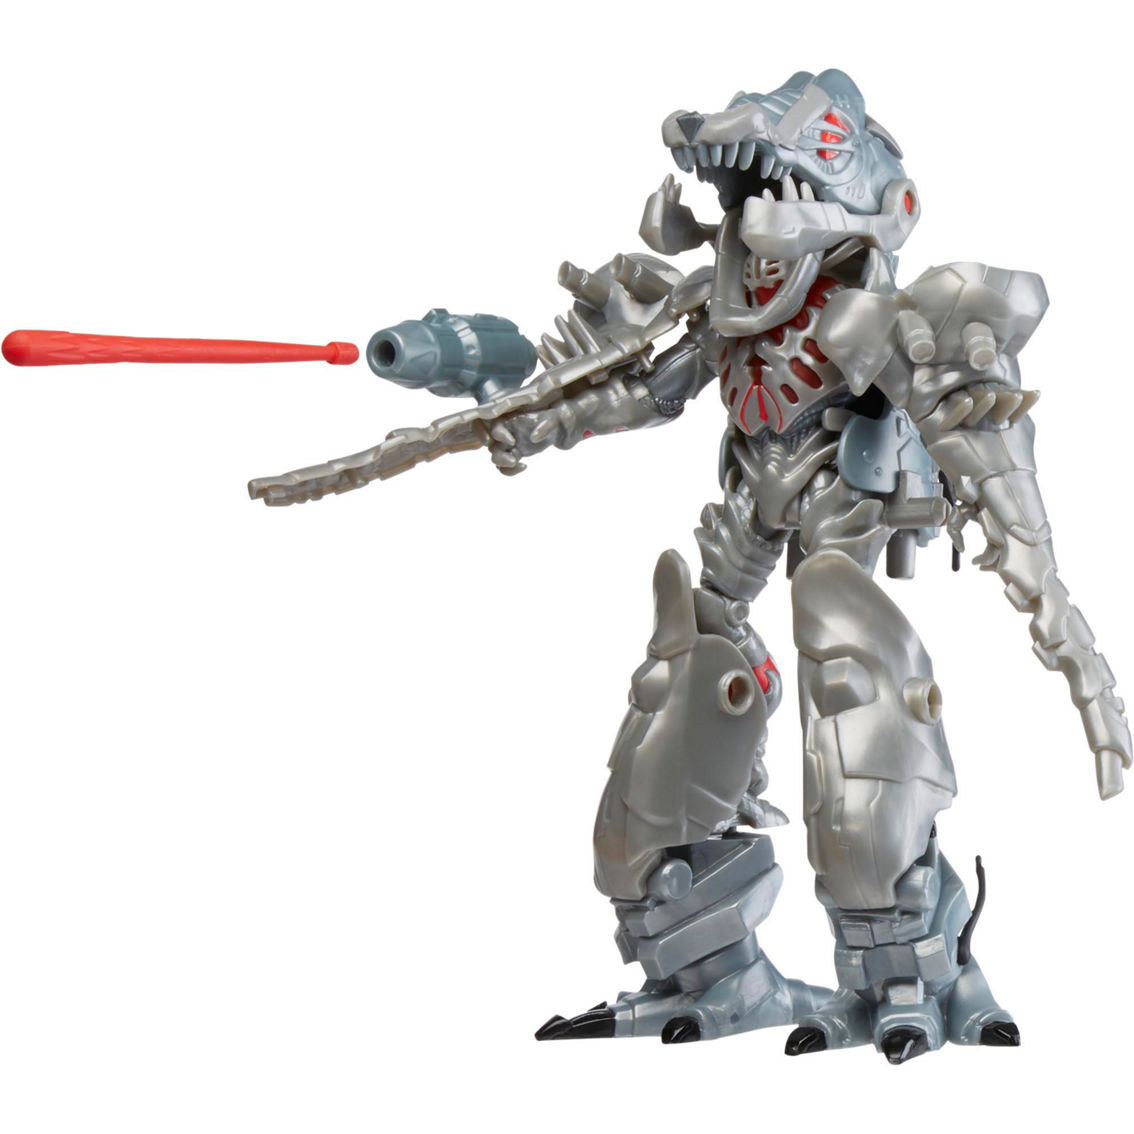 Marvel Mech Strike Mechasaurs Ultron Primeval with T-R3X - Image 3 of 4